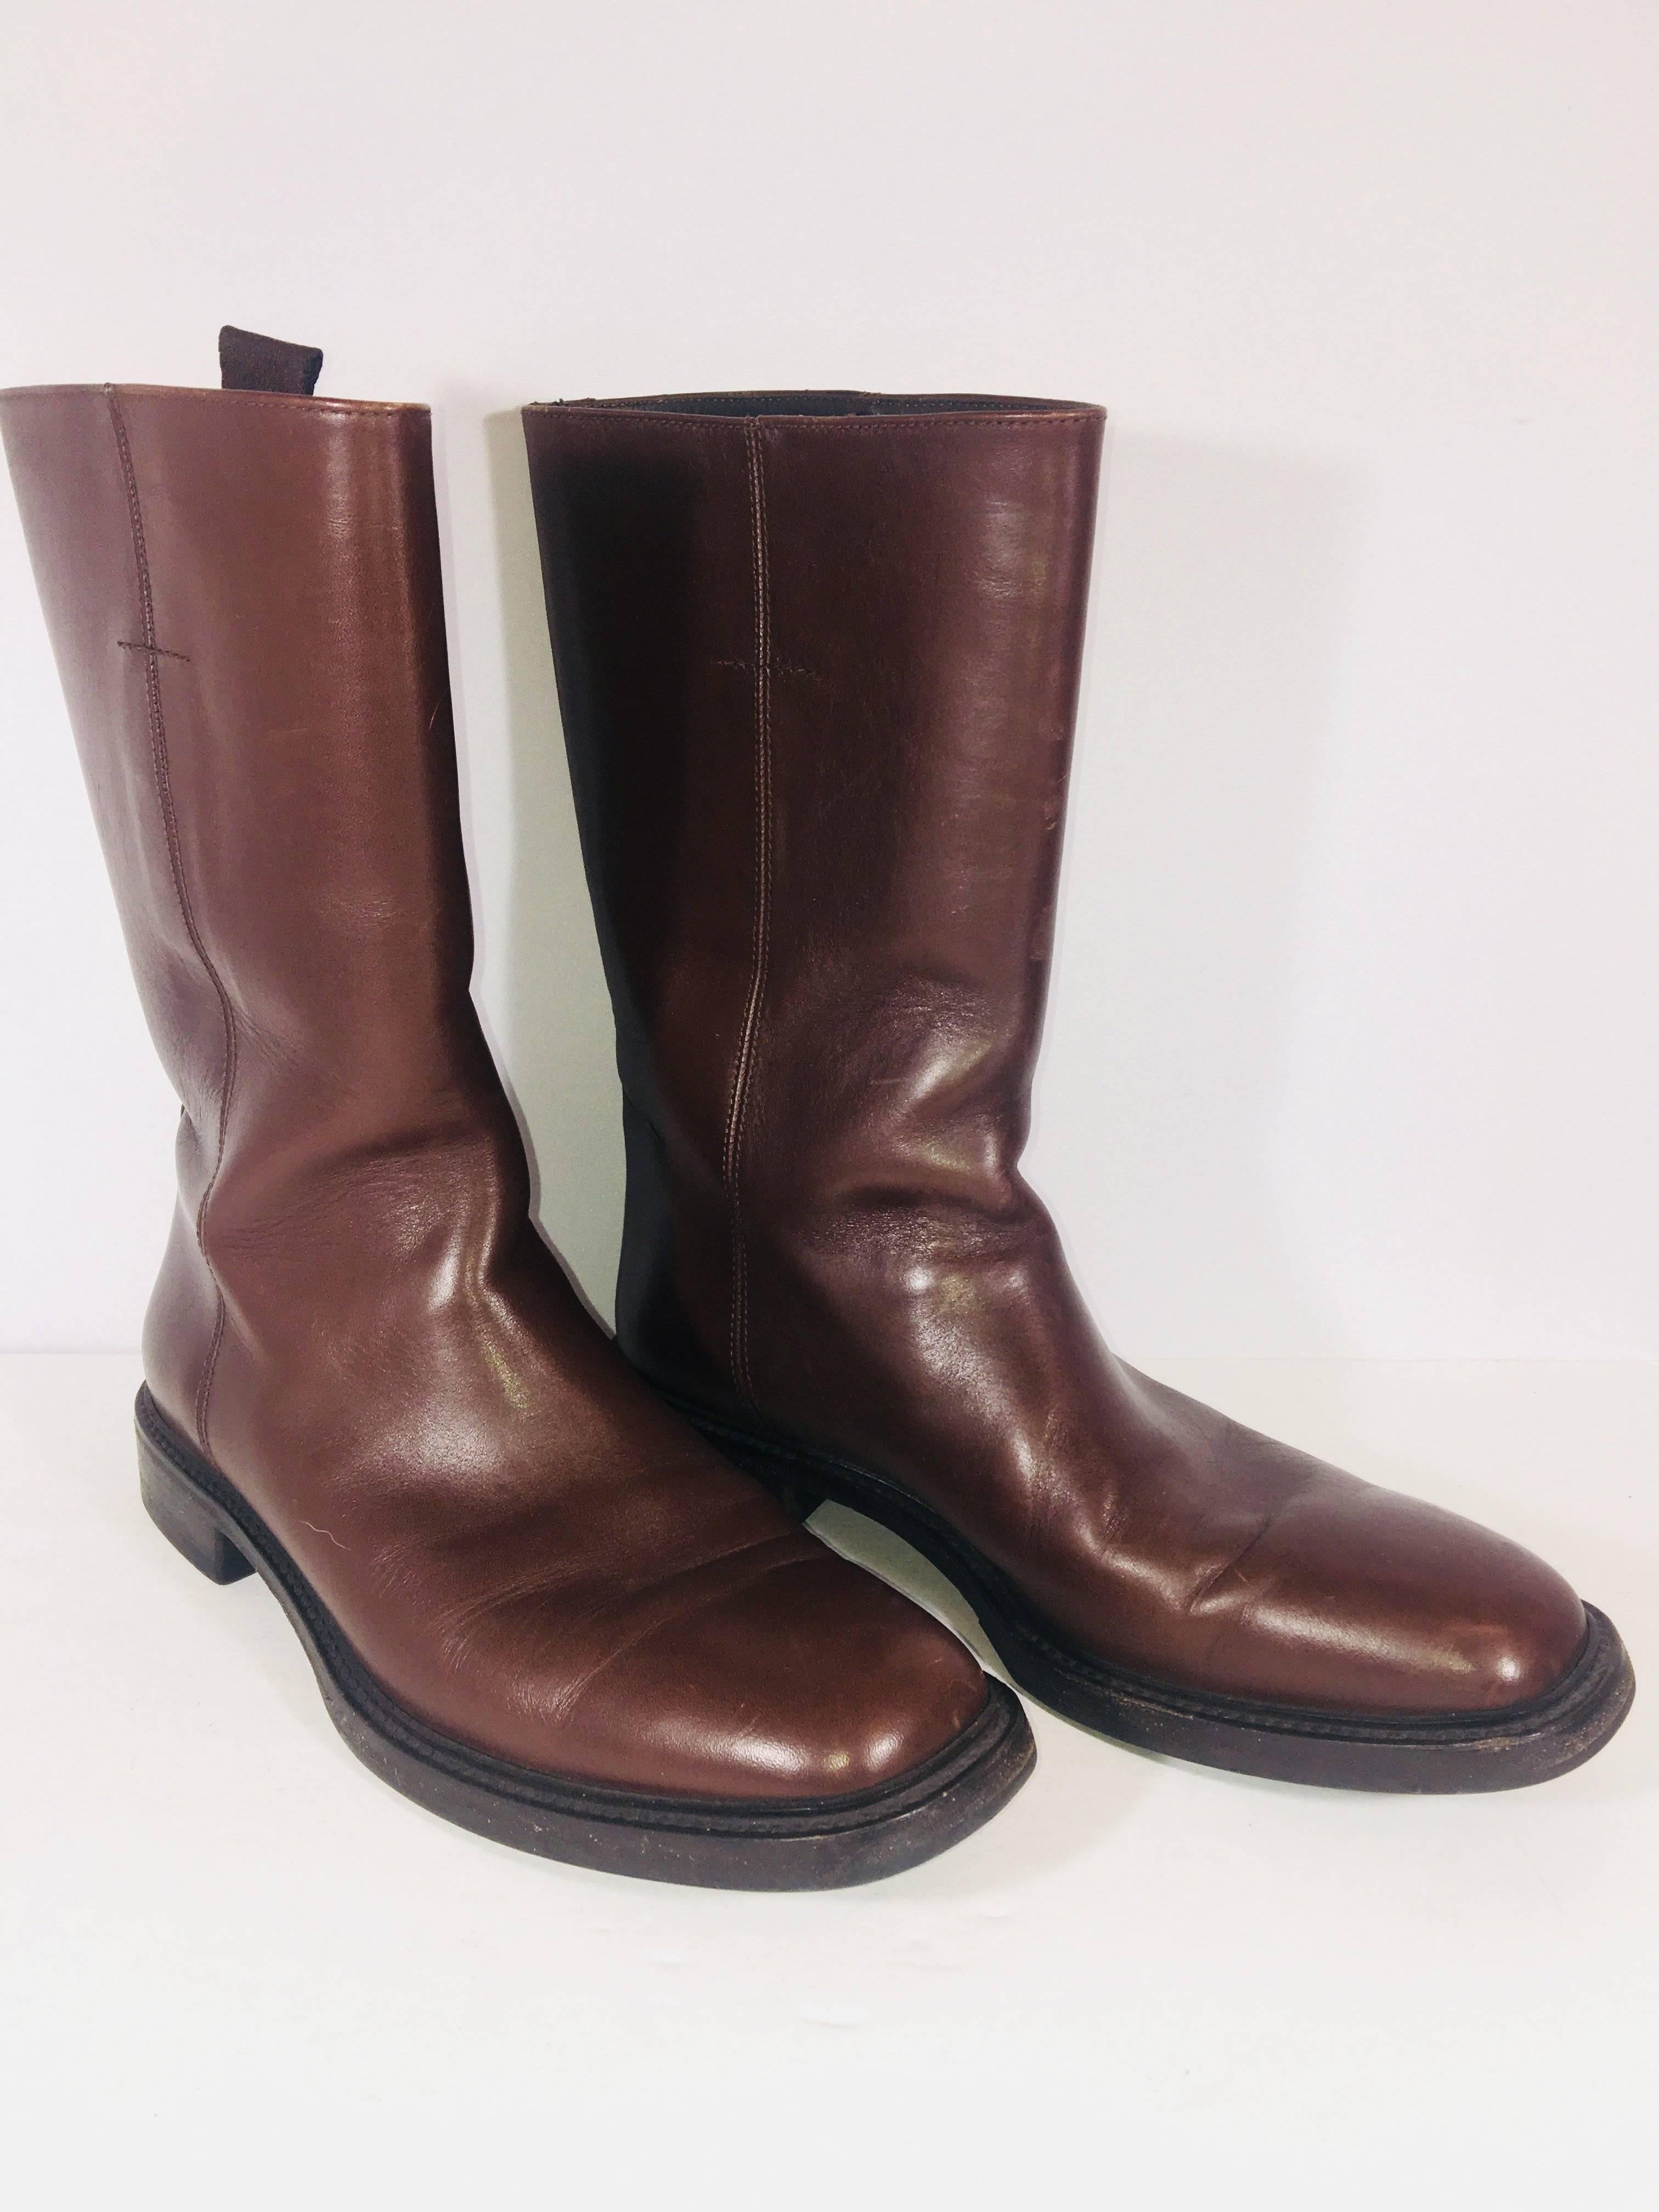 Men's Prada Pull On Brown Leather Riding Boots with Square Toe.